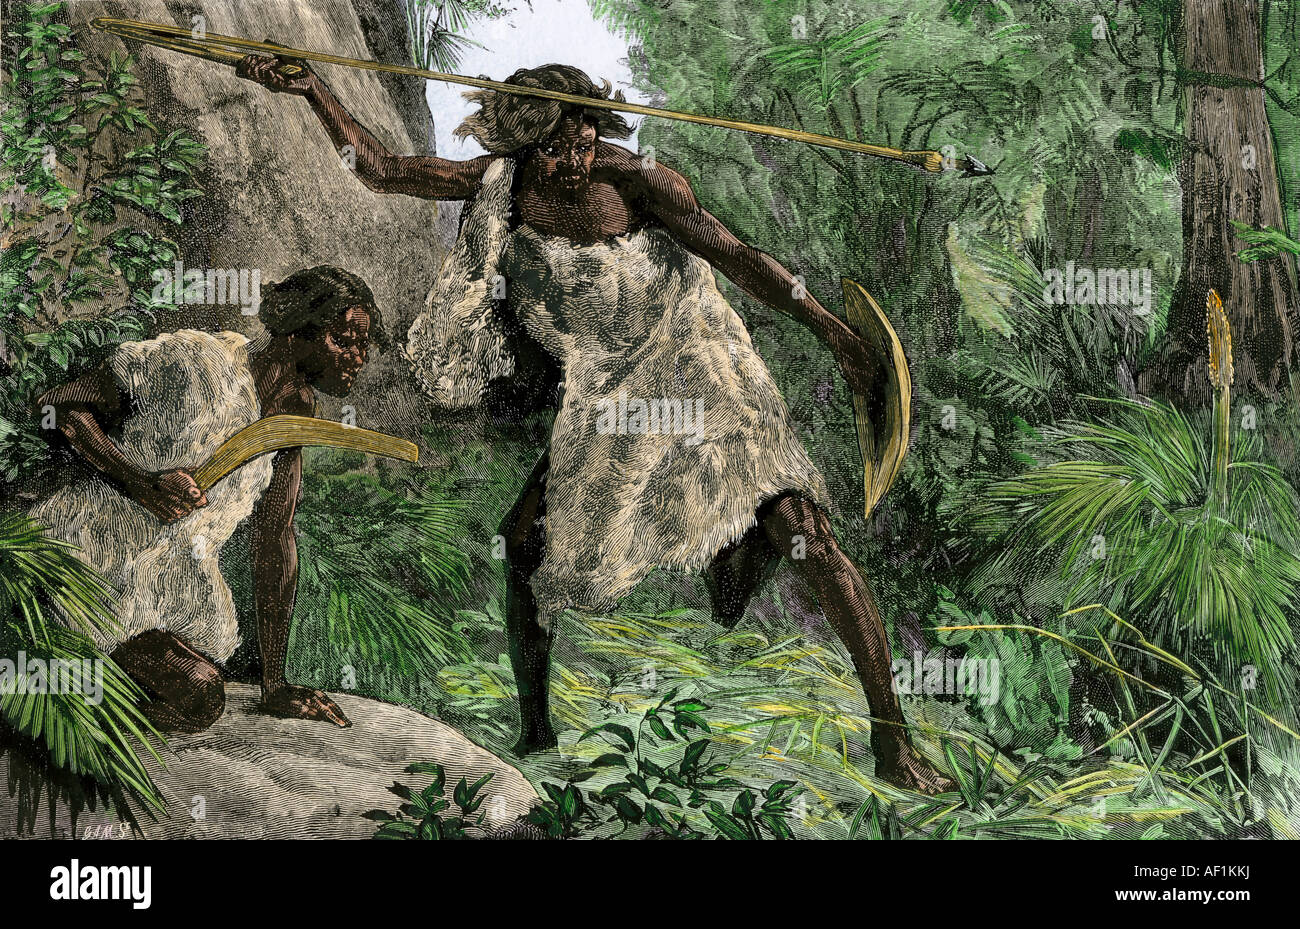 Aborigines hunting with an atlatl boomerang in an Australian forest 1800s. Hand-colored woodcut Stock Photo